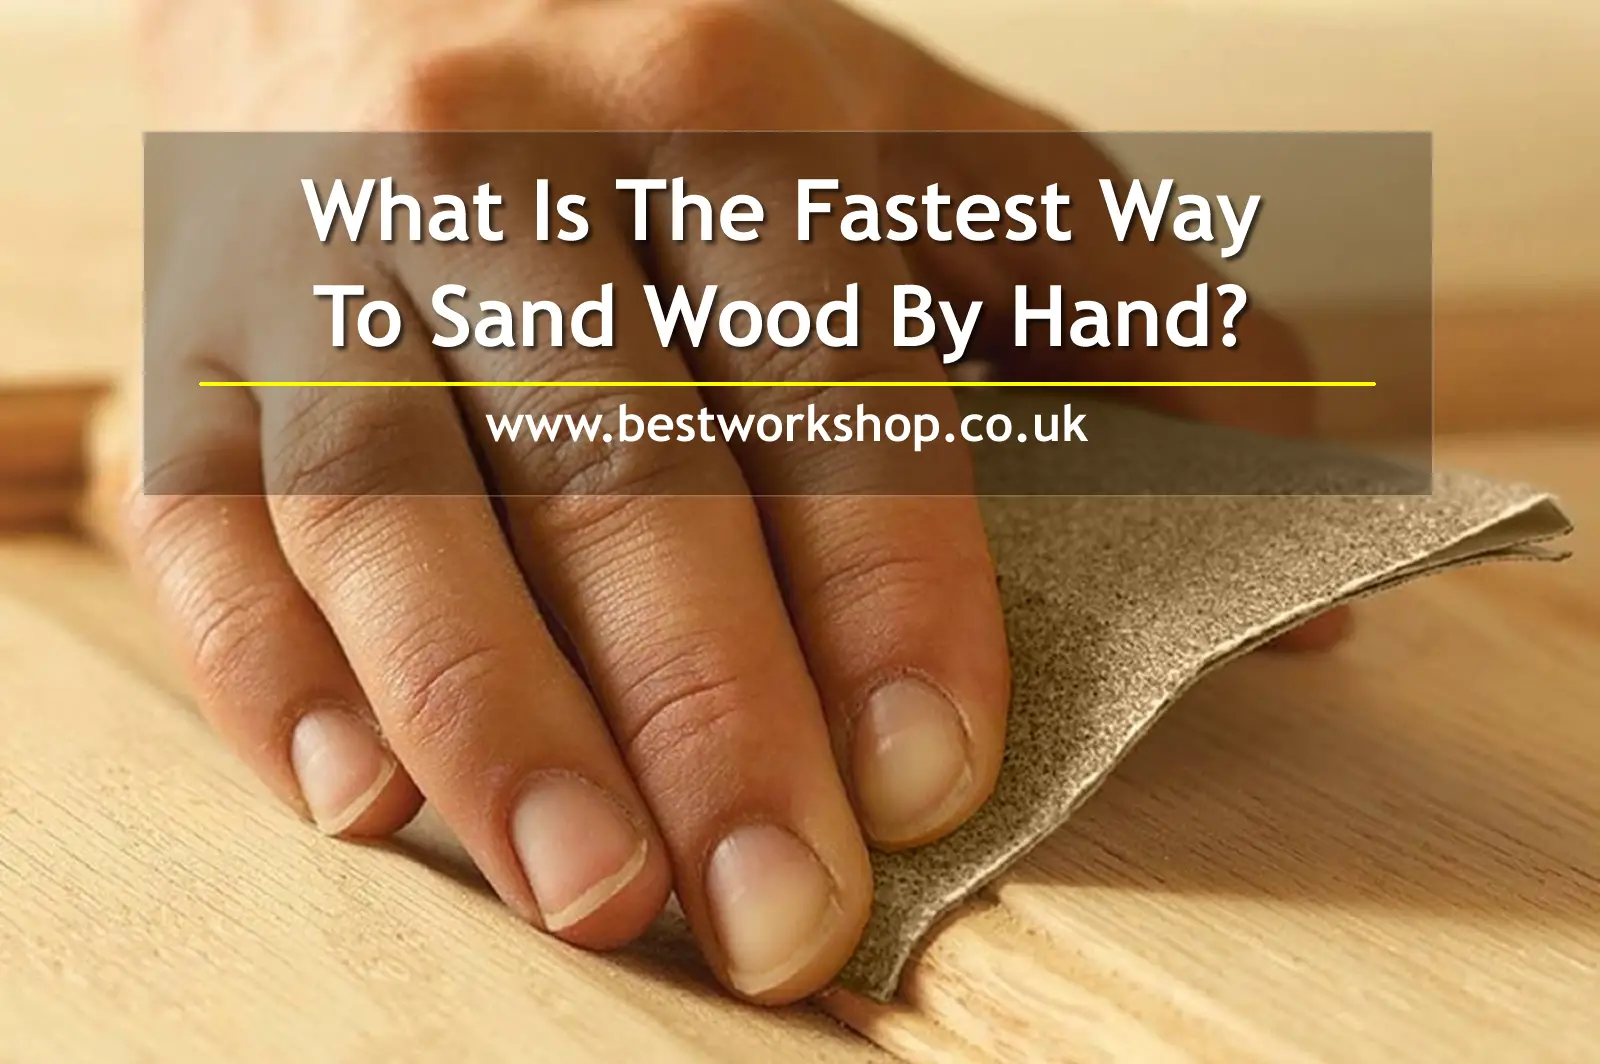 What Is The Fastest Way To Sand Wood By Hand?